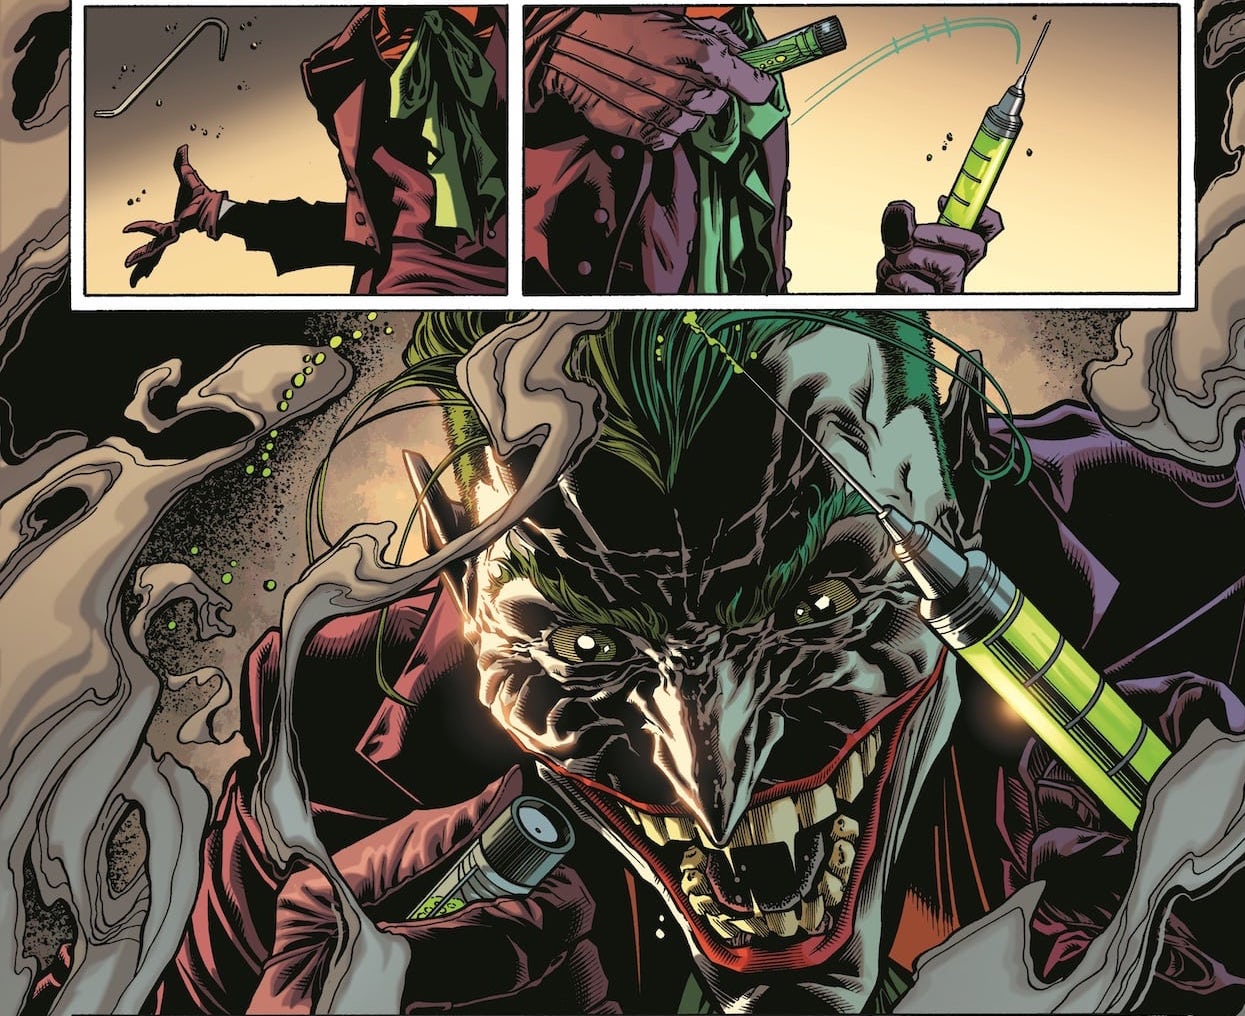 DC First Look: Detective Comics #1023 - The Joker is back to crash the party!